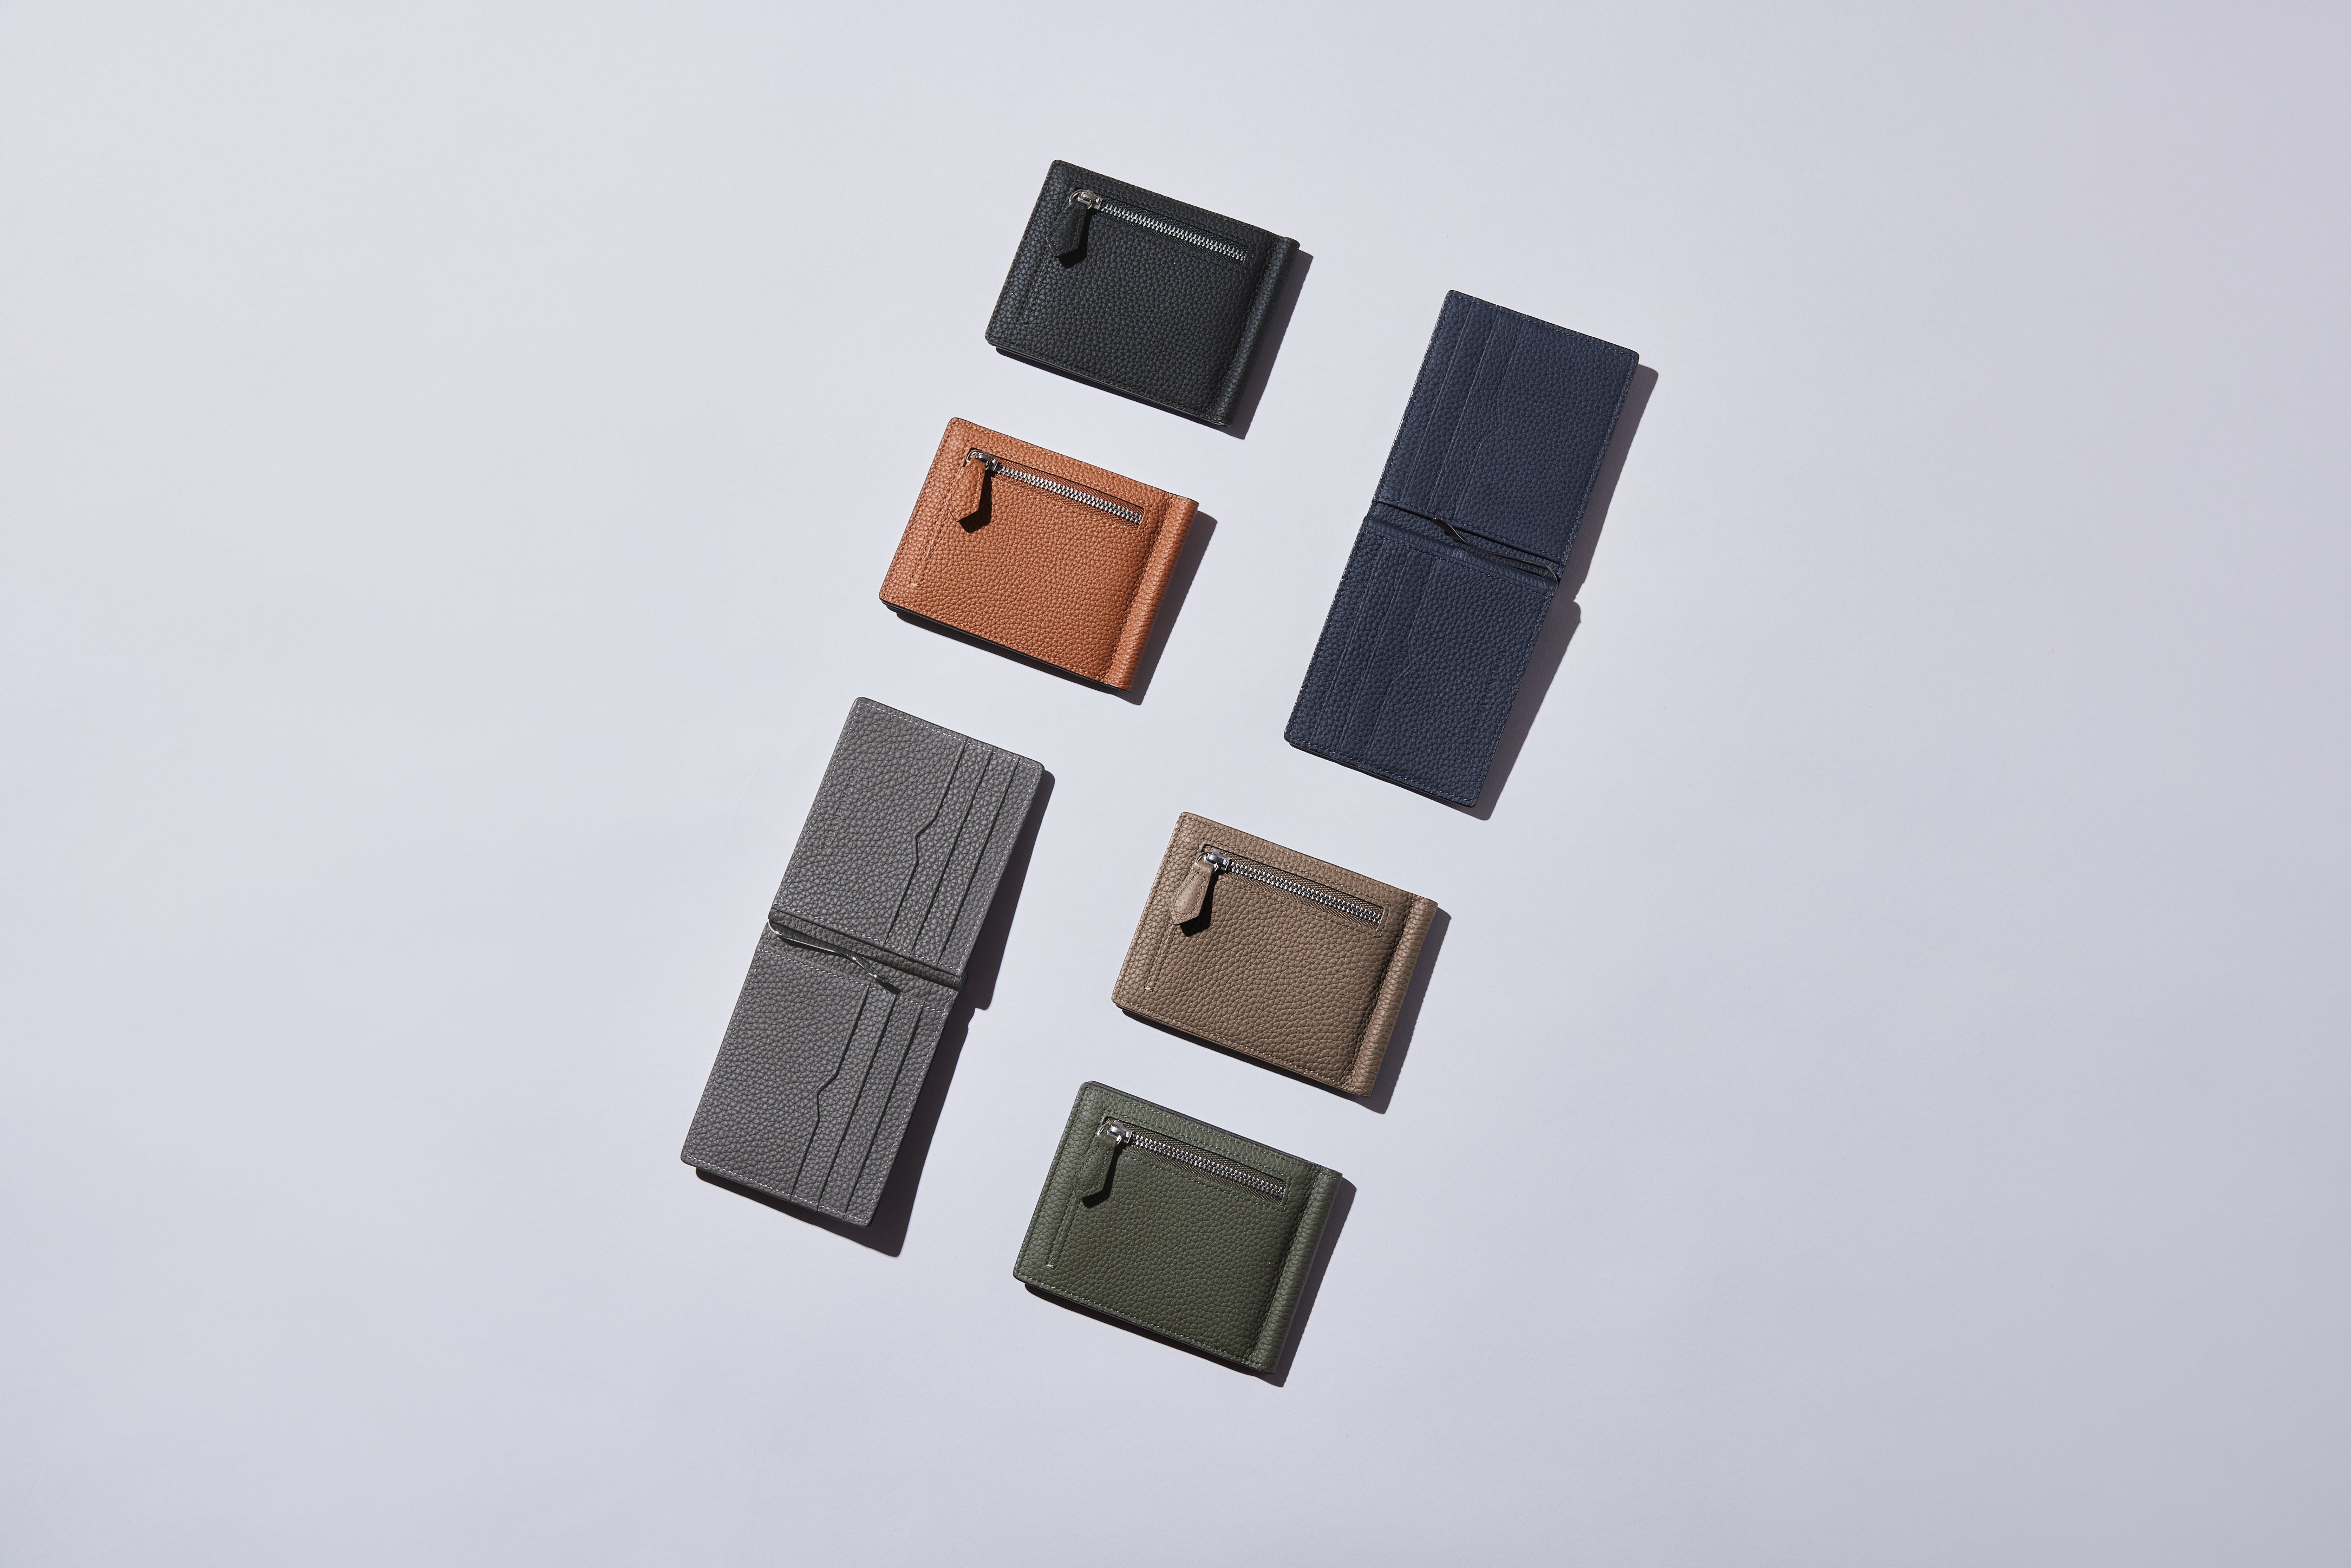 A wide selection of men's leather wallets in a variety of colors.